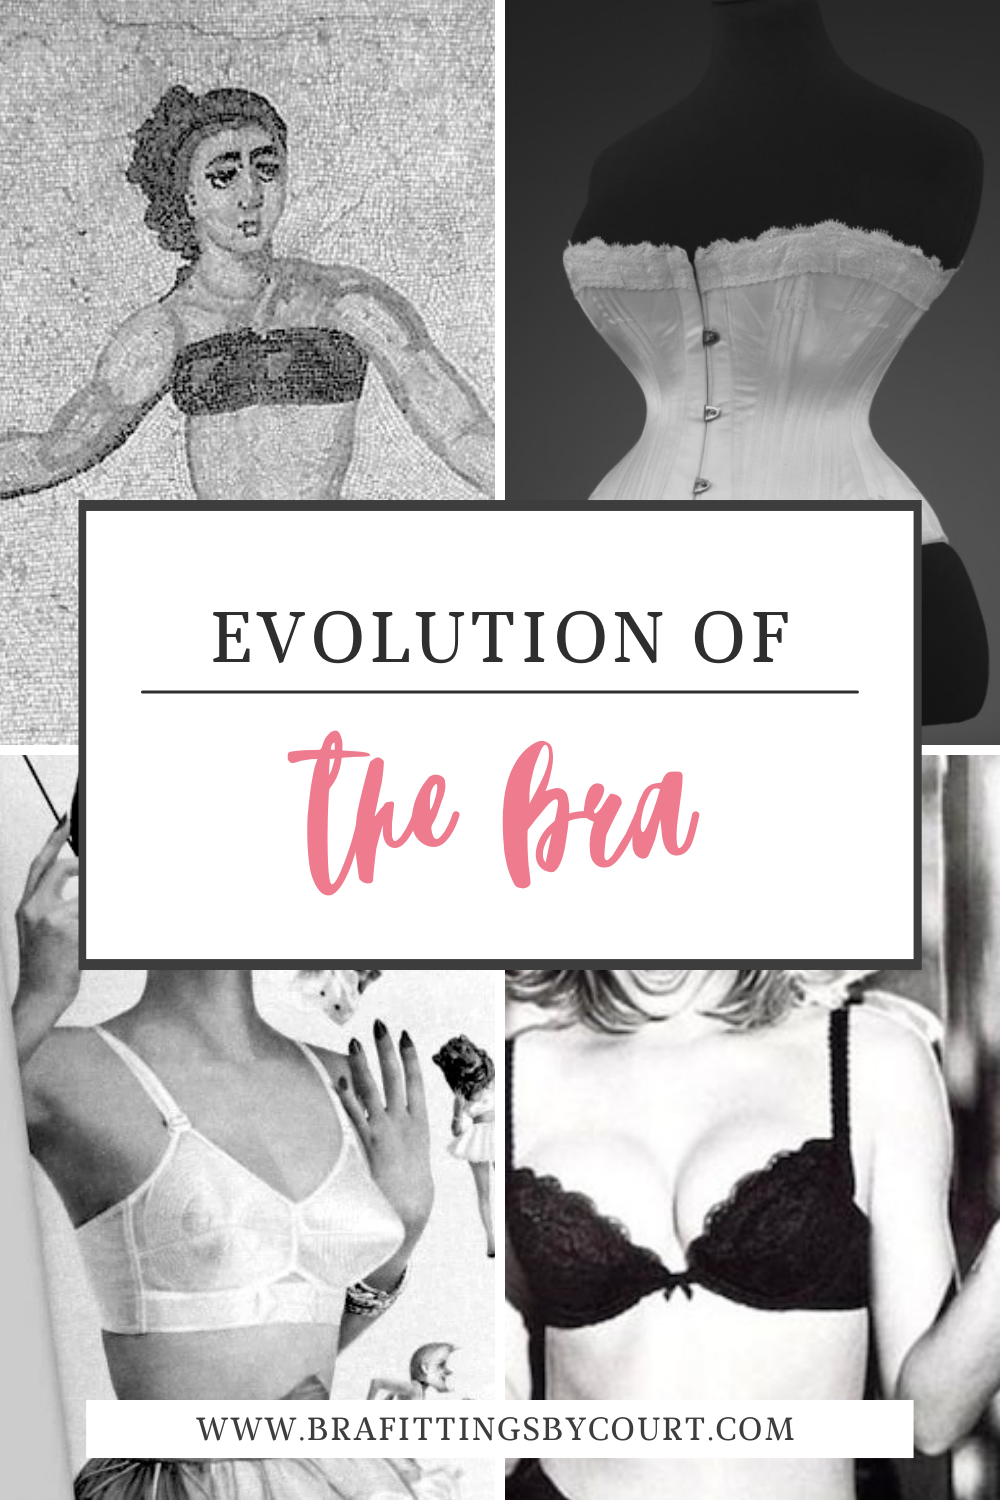 Breakout Bras - Let's take a look at how bras have evolved in the